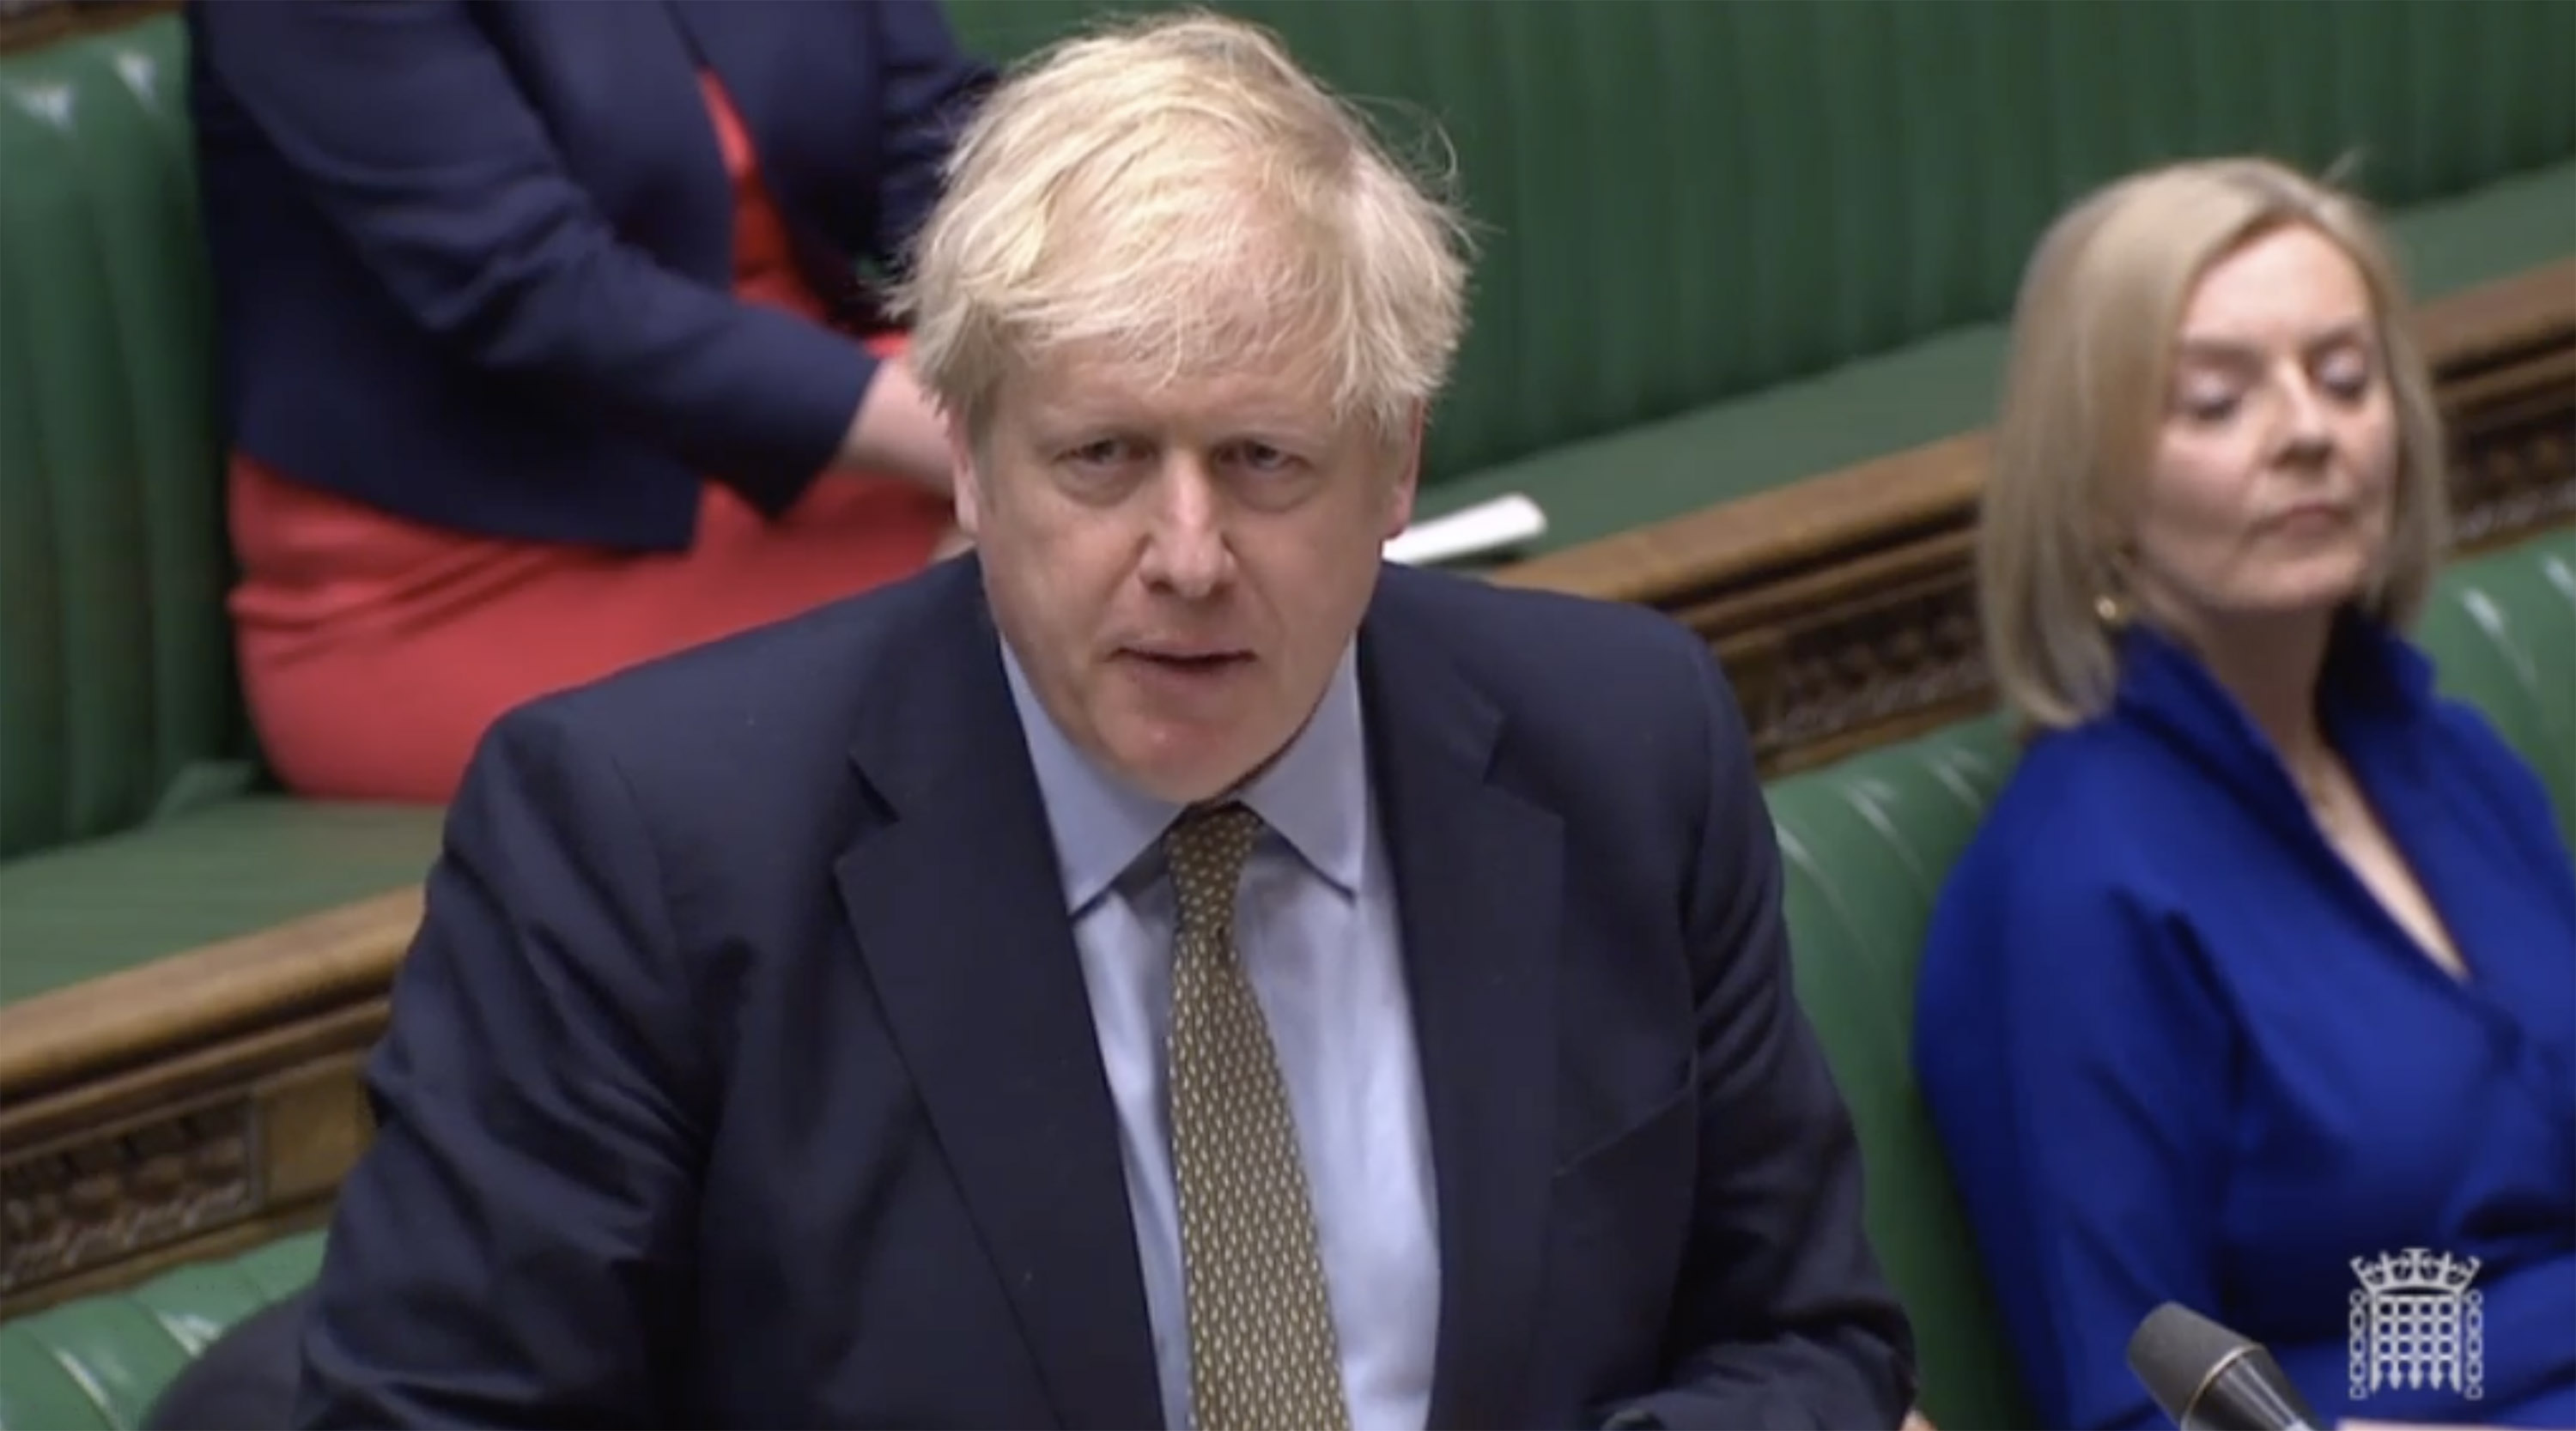 UK Prime Minister Boris Johnson speaks during Prime Minister's Questions in the House of Commons, in London on March 18.